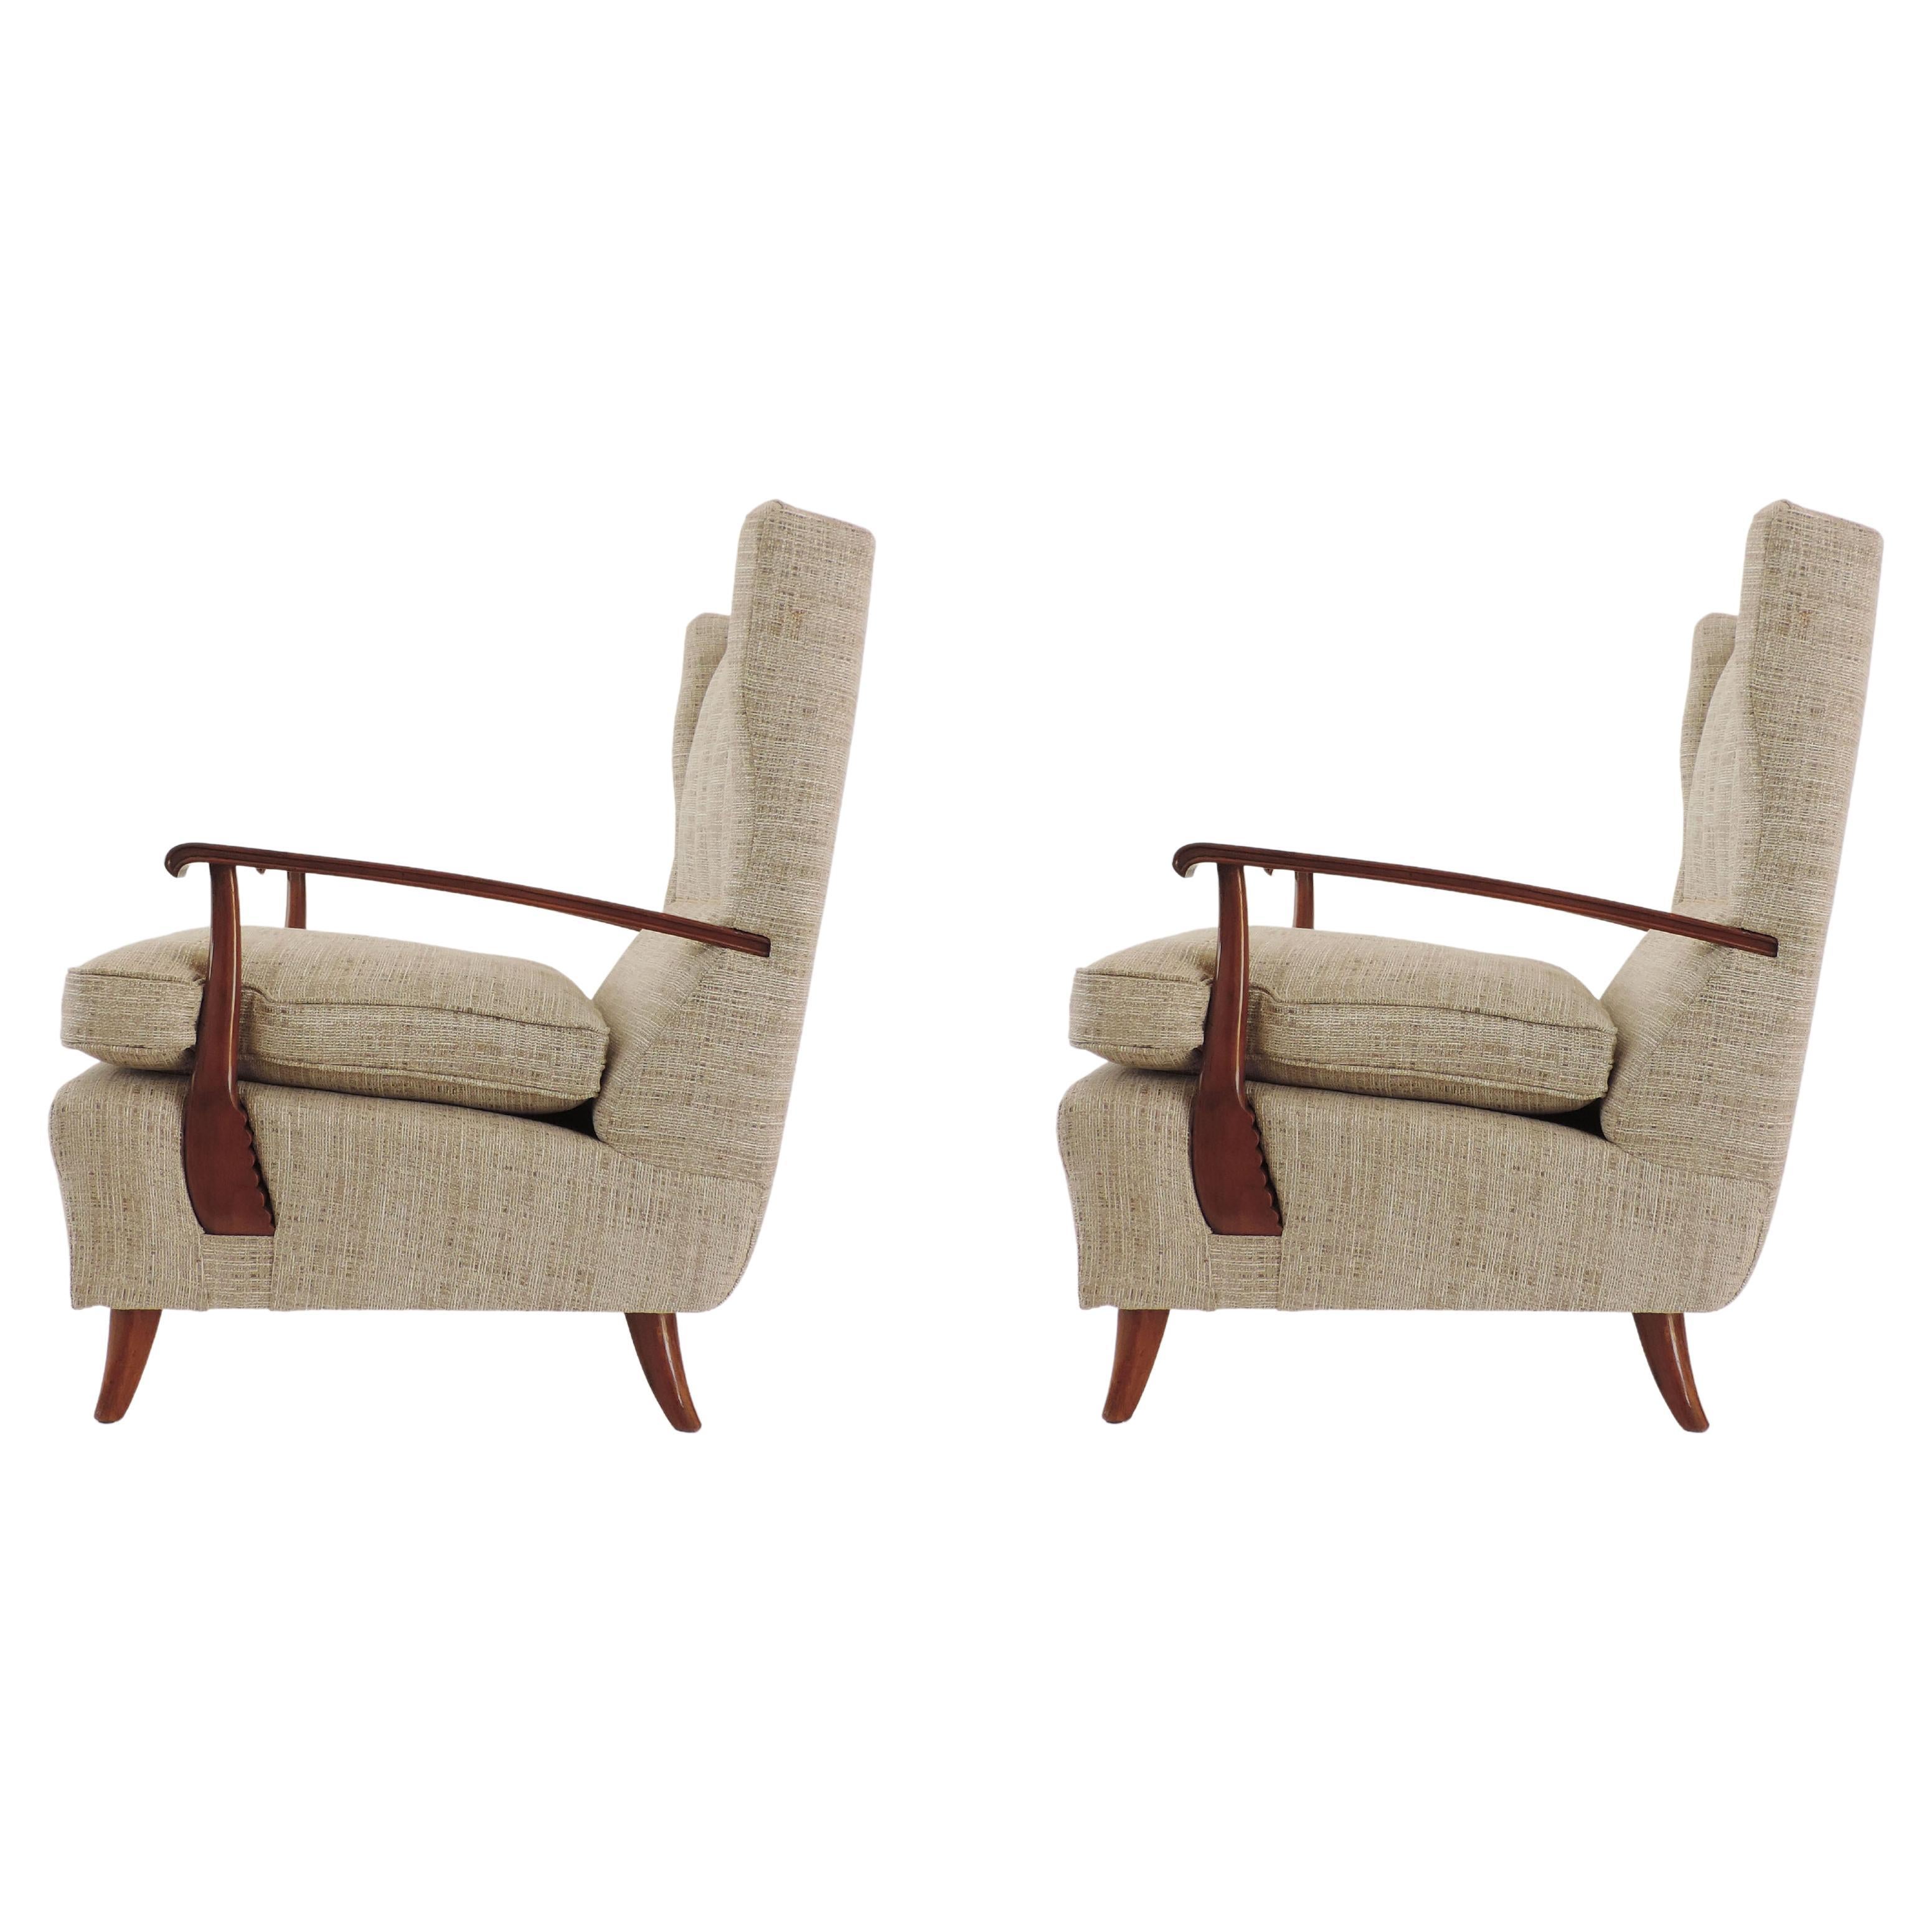 Spectacular Pair of Paolo Buffa Armchairs, Italy, 1940s